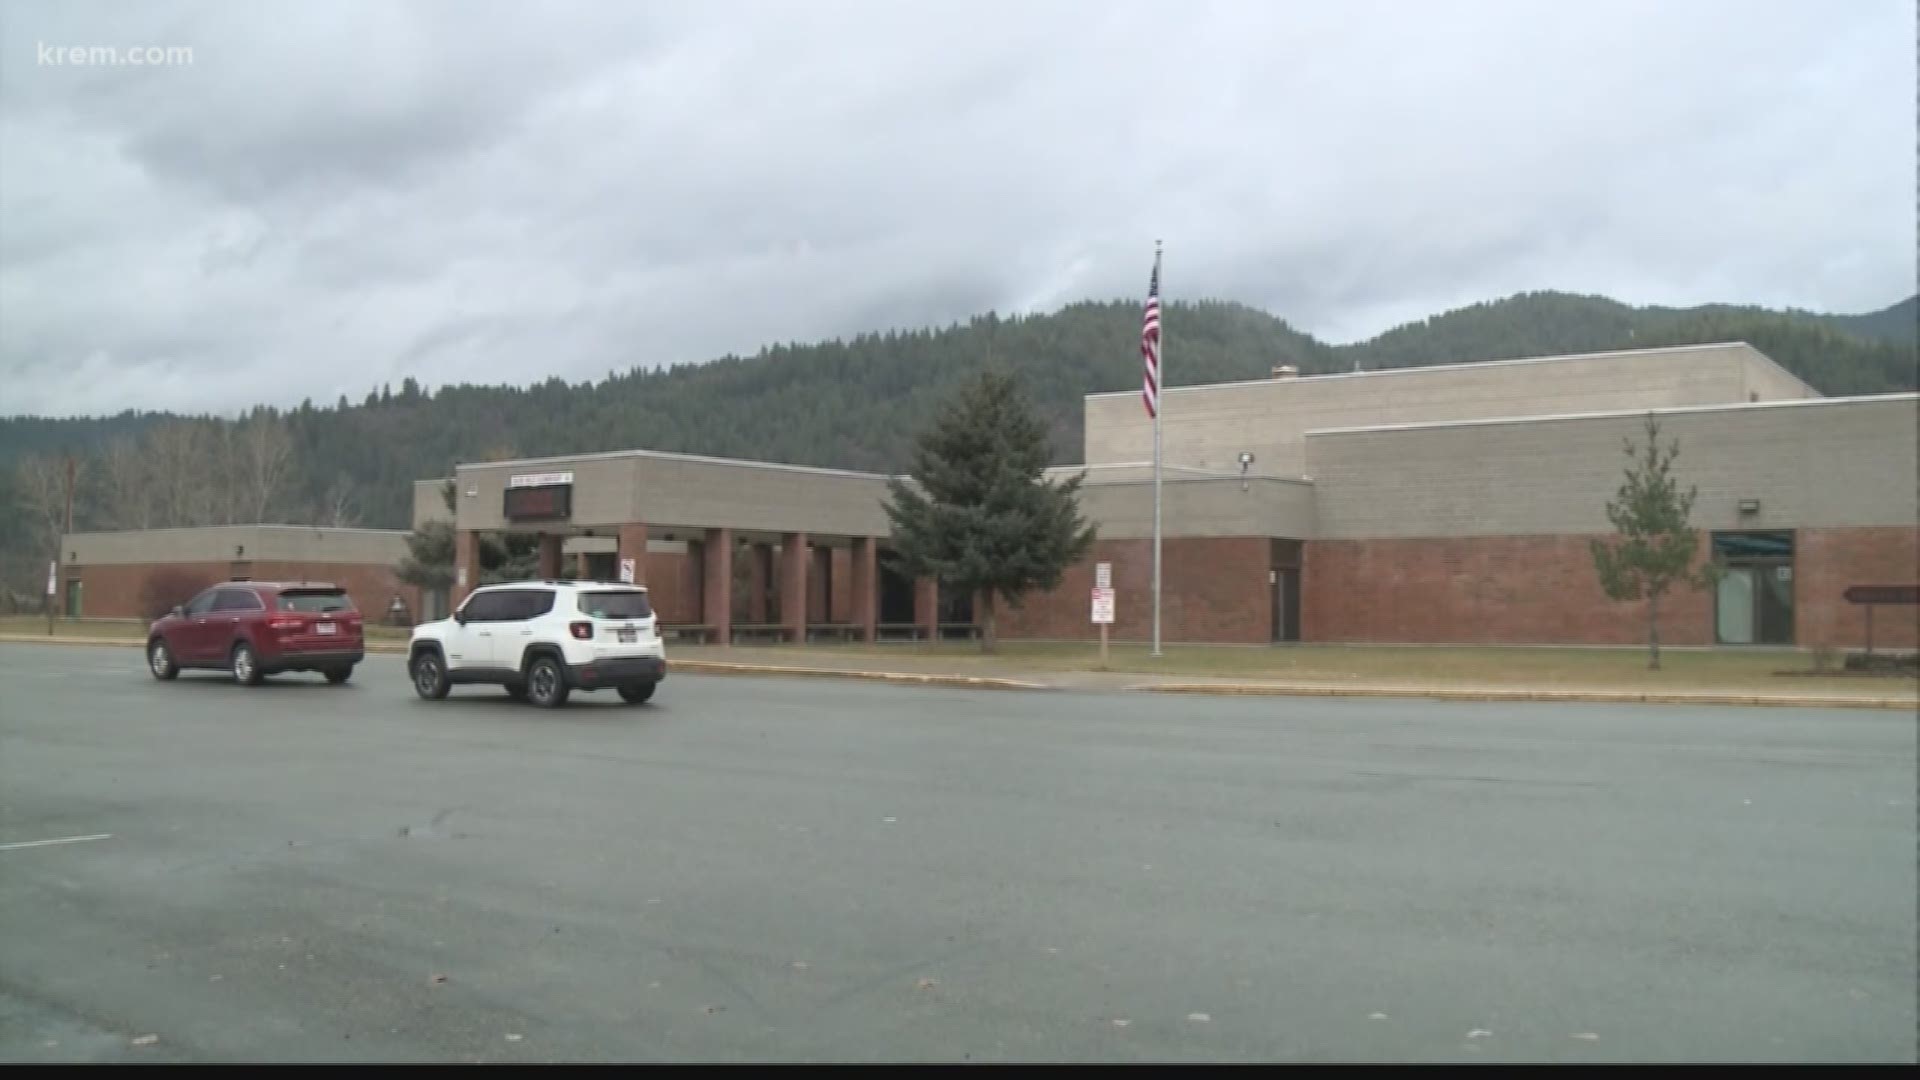 Silver Hills Elementary closed for two days this week due to a large number of ill students and staff. They are bringing in cleaning crews to disinfect the buildings